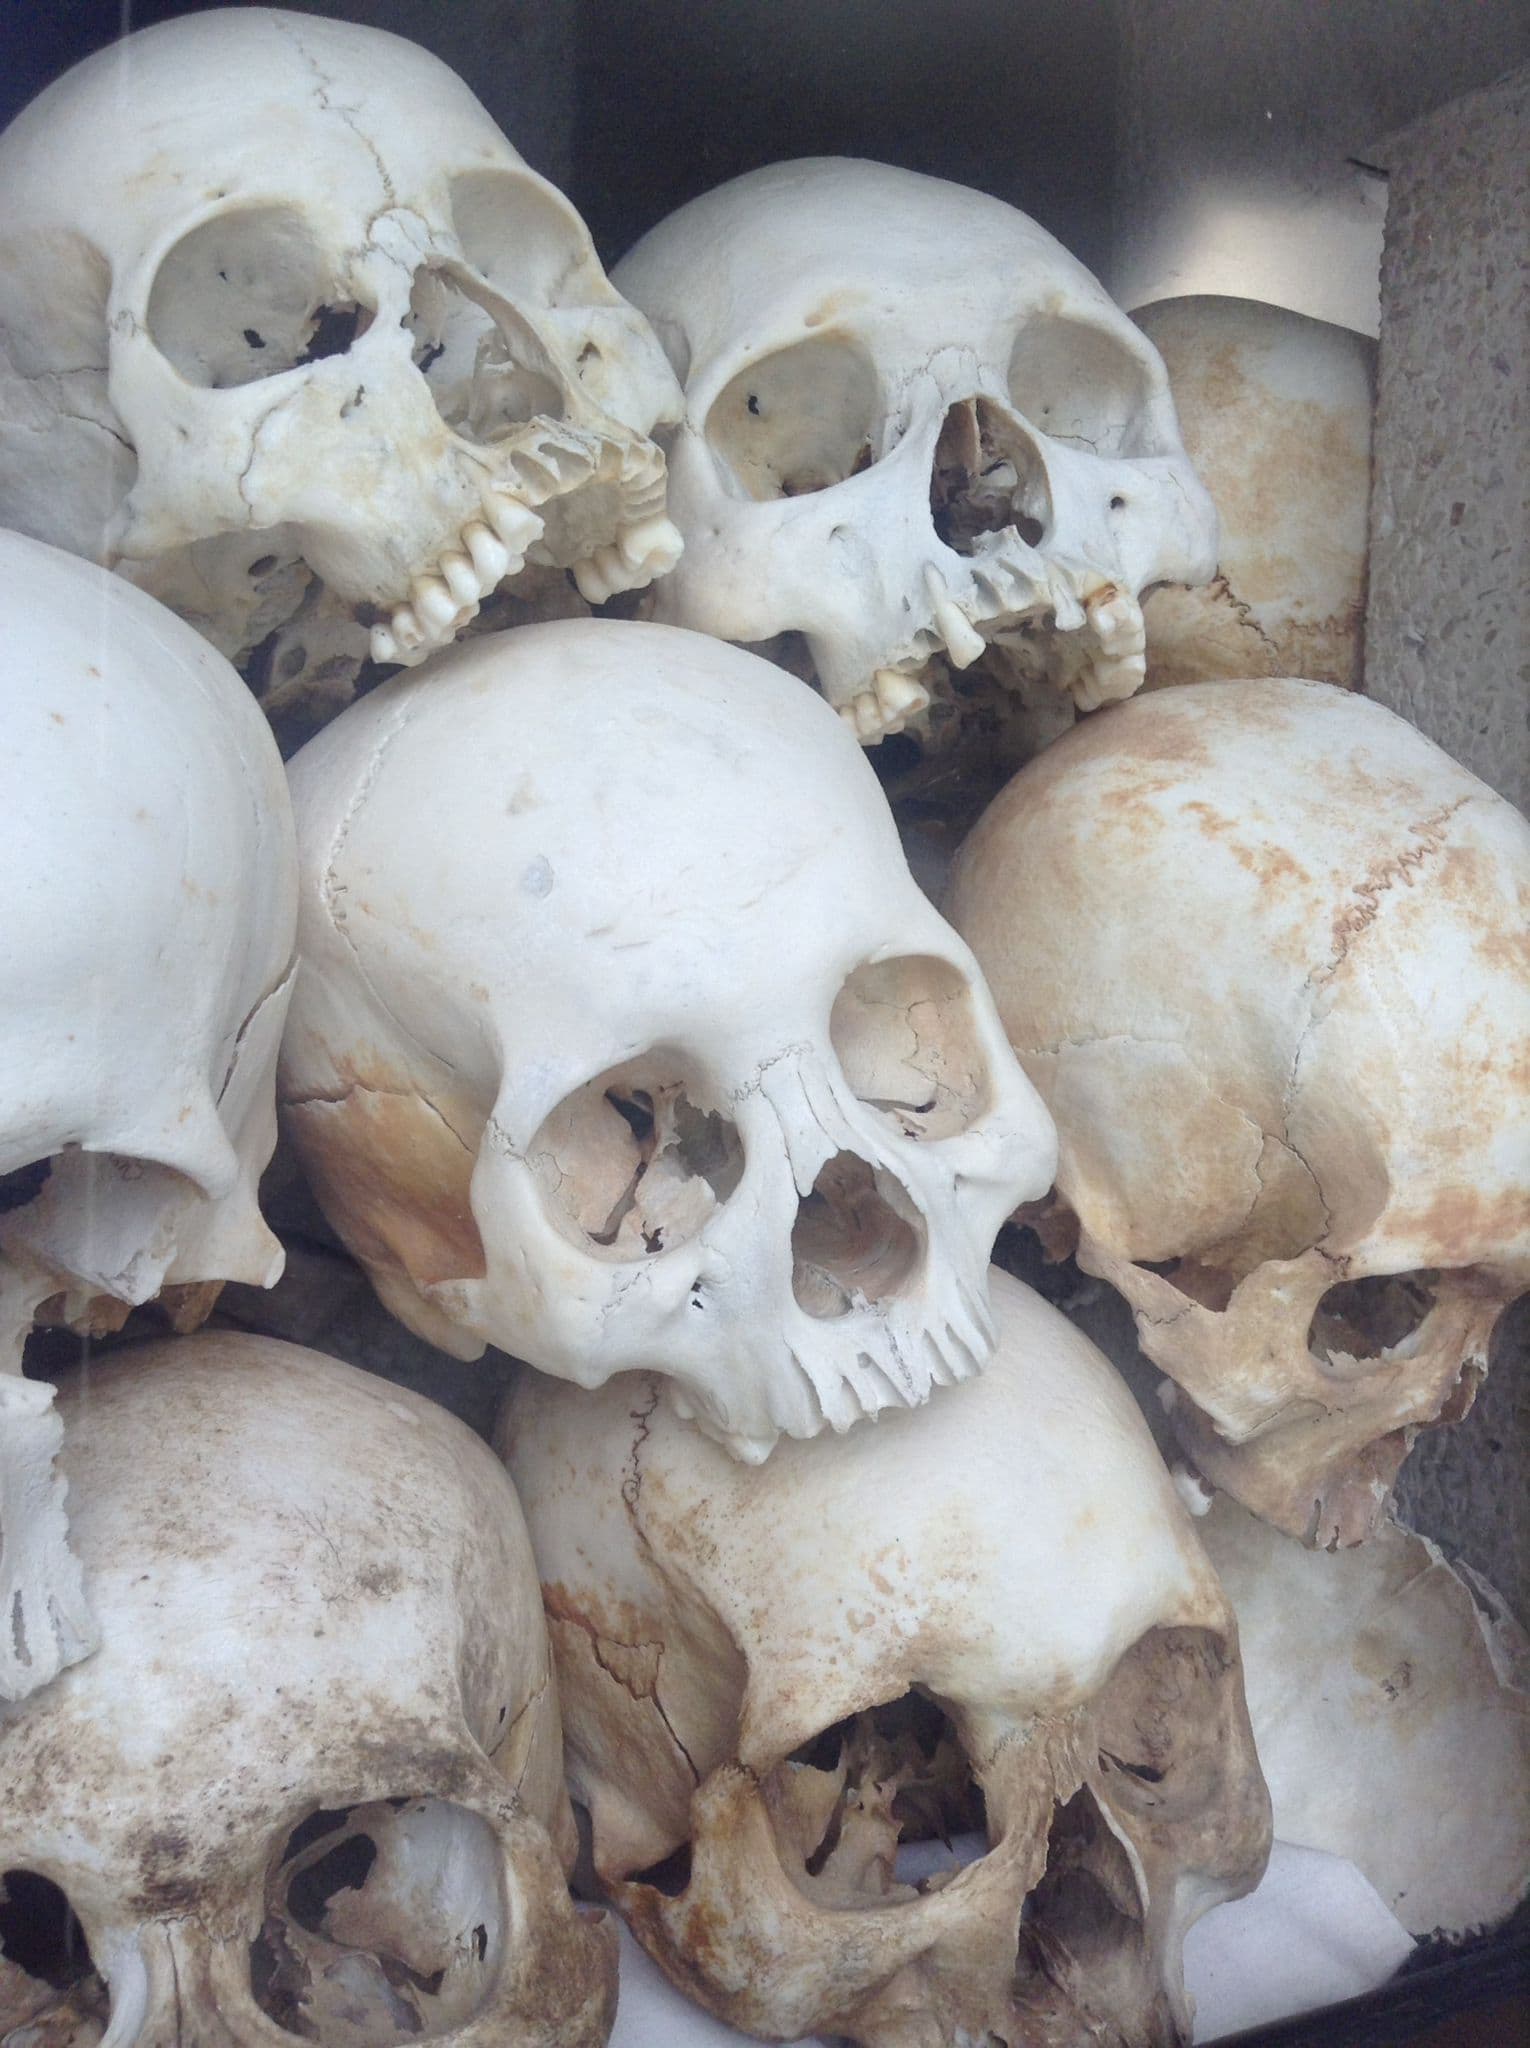 A tower of skulls stacked on top of each other at the Choeung Ek Killing Fields in Phnom Penh, Cambodia